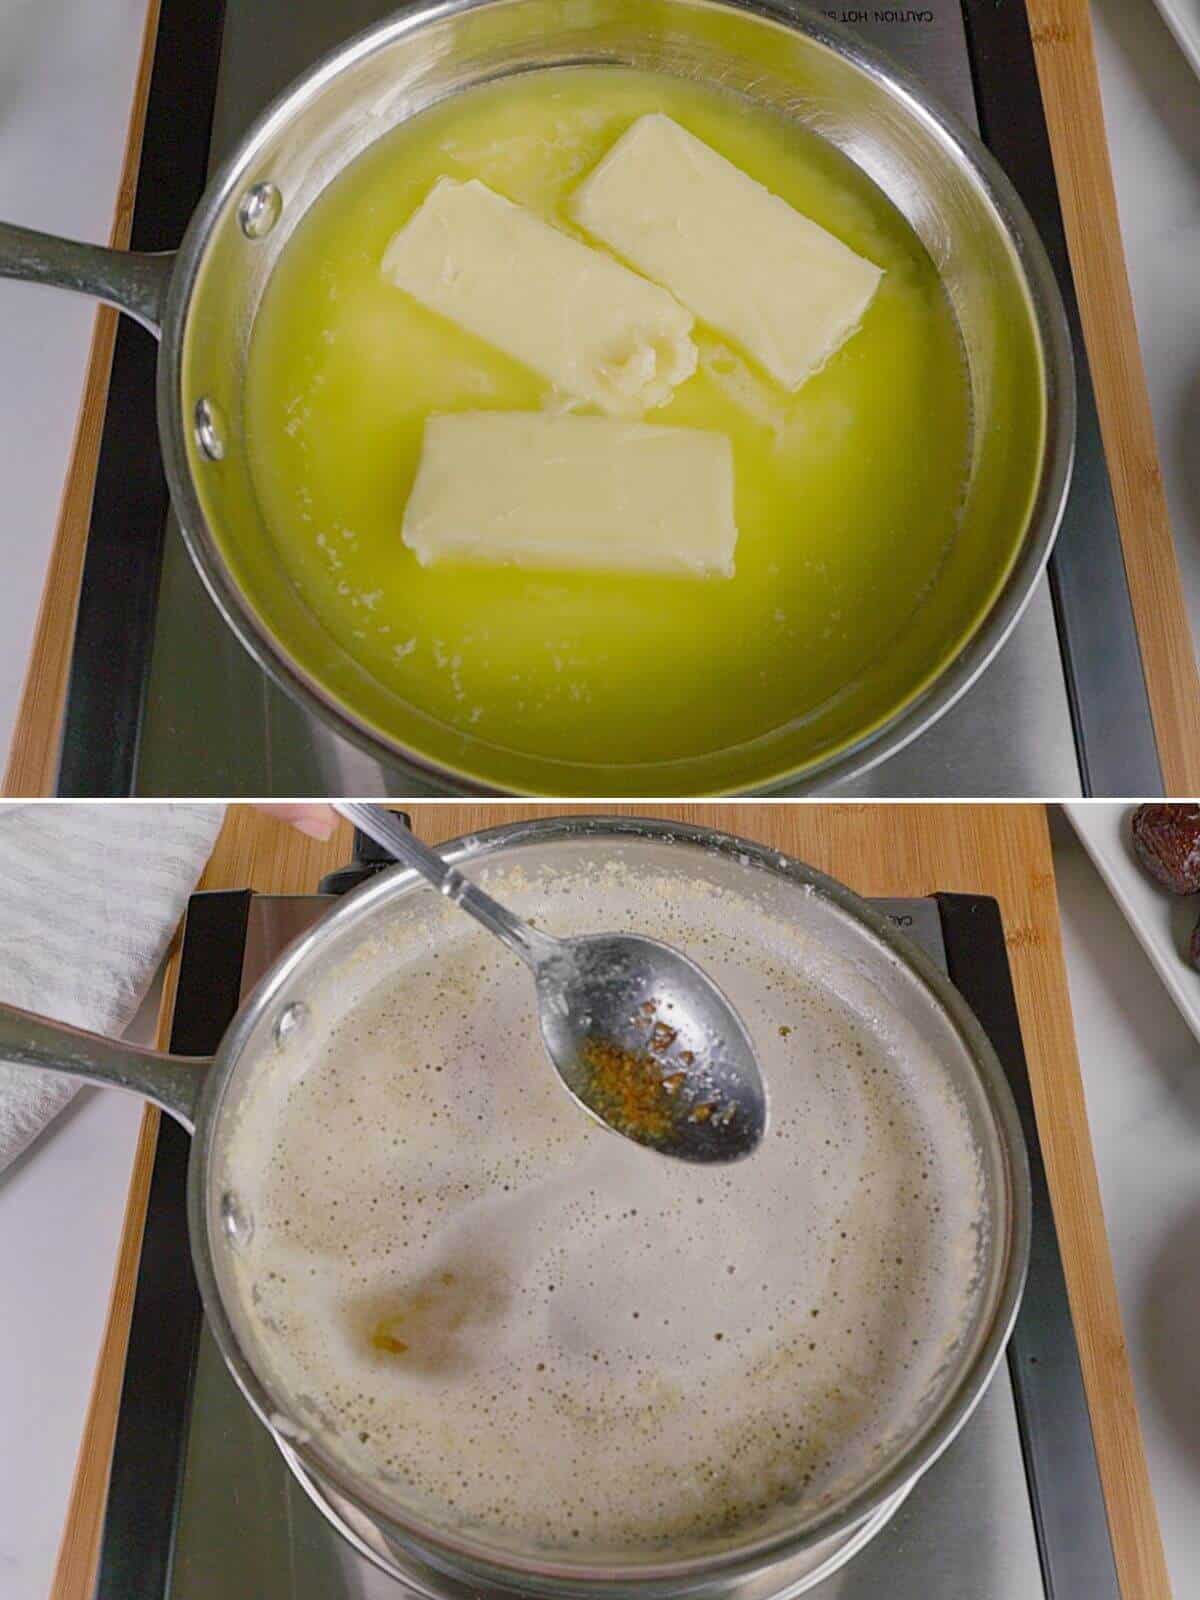 Ghee being made from butter.